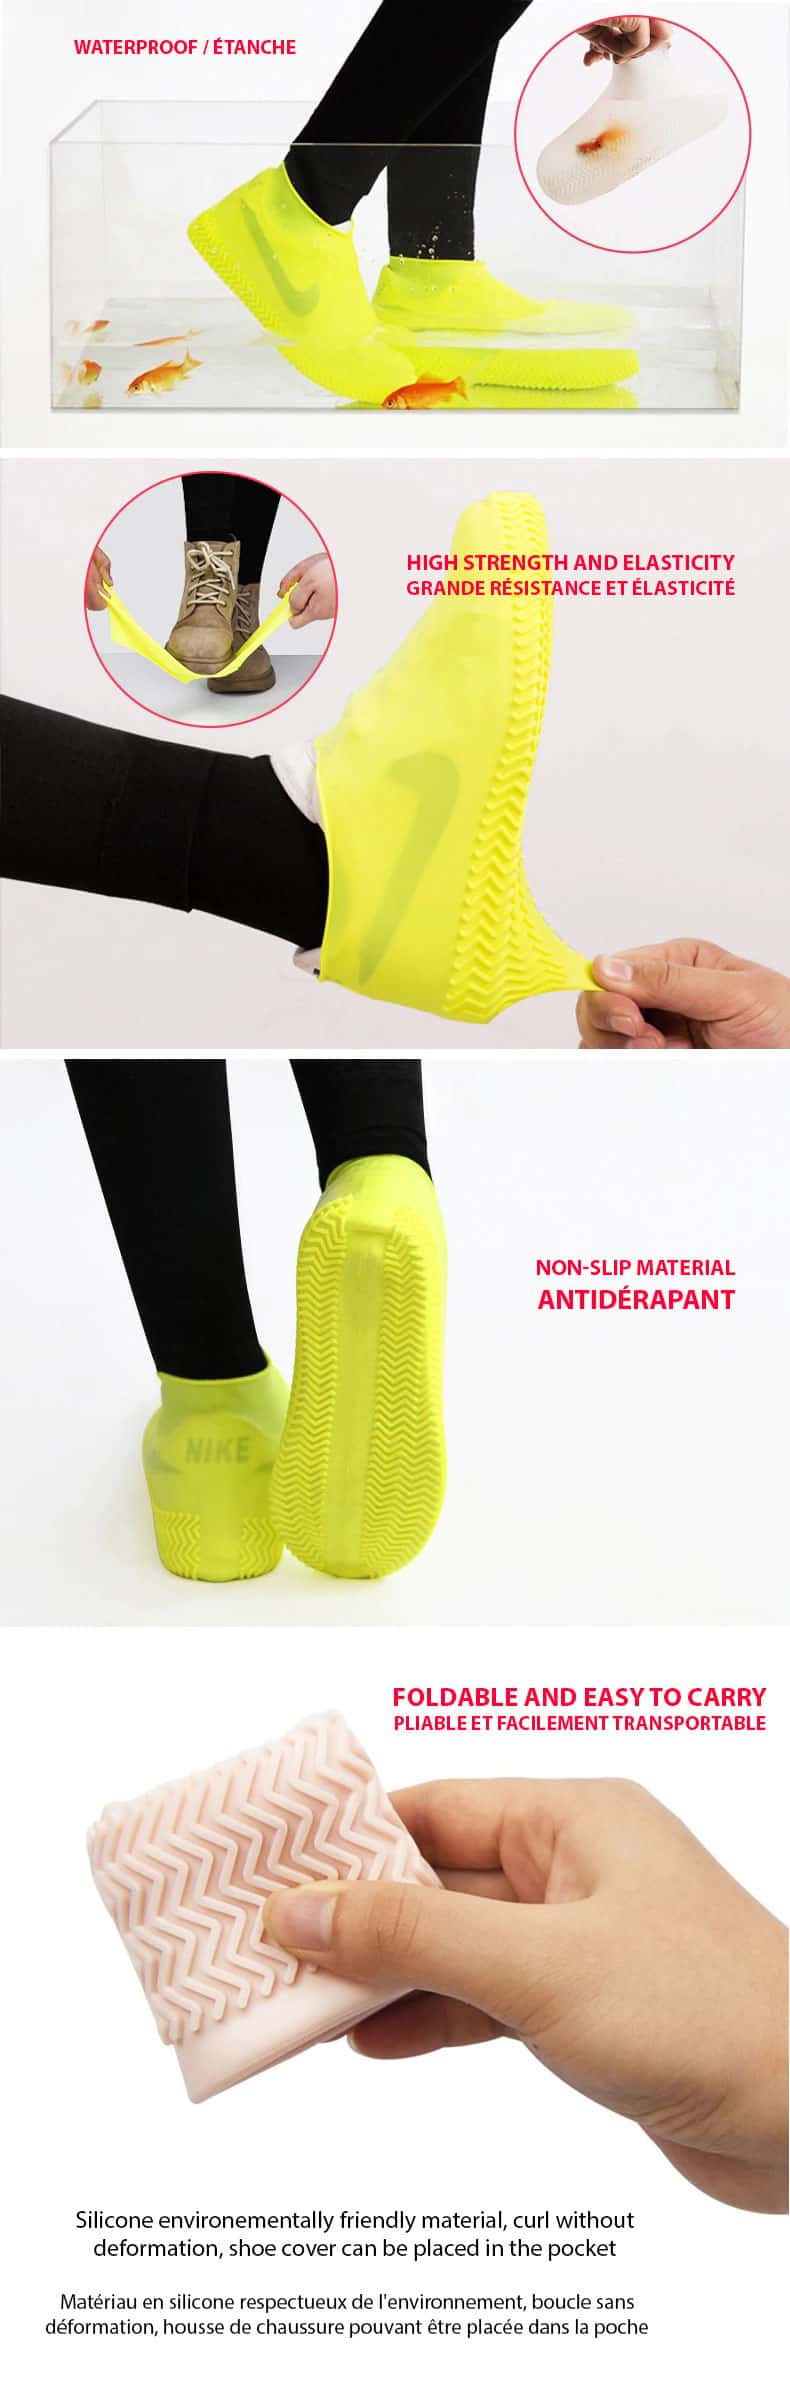 Waterproof Silicone Reusable Shoe Covers